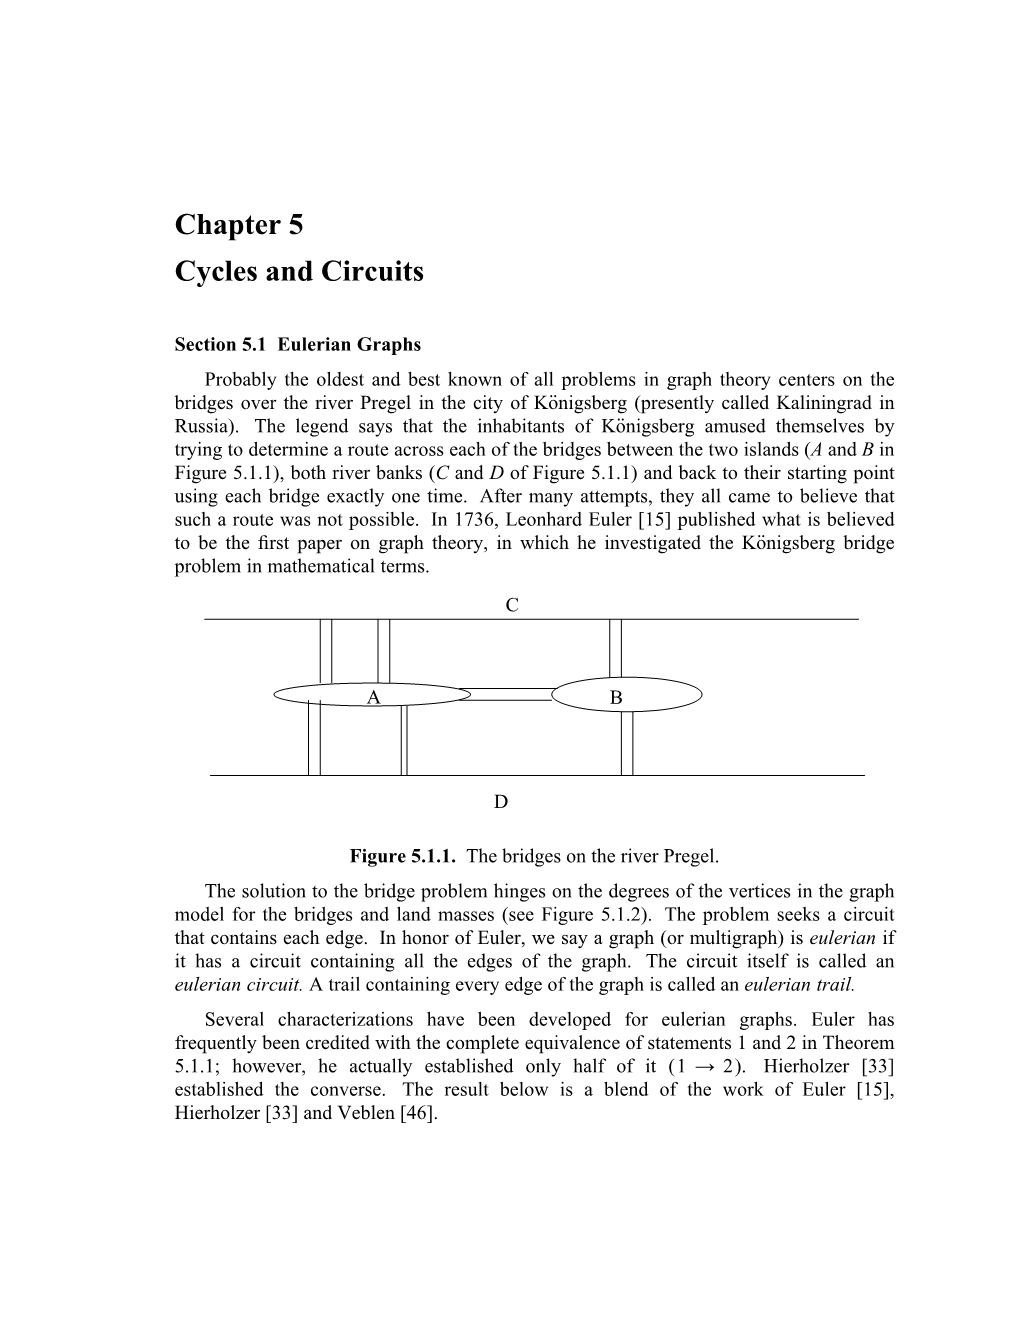 Chapter 5 Cycles and Circuits